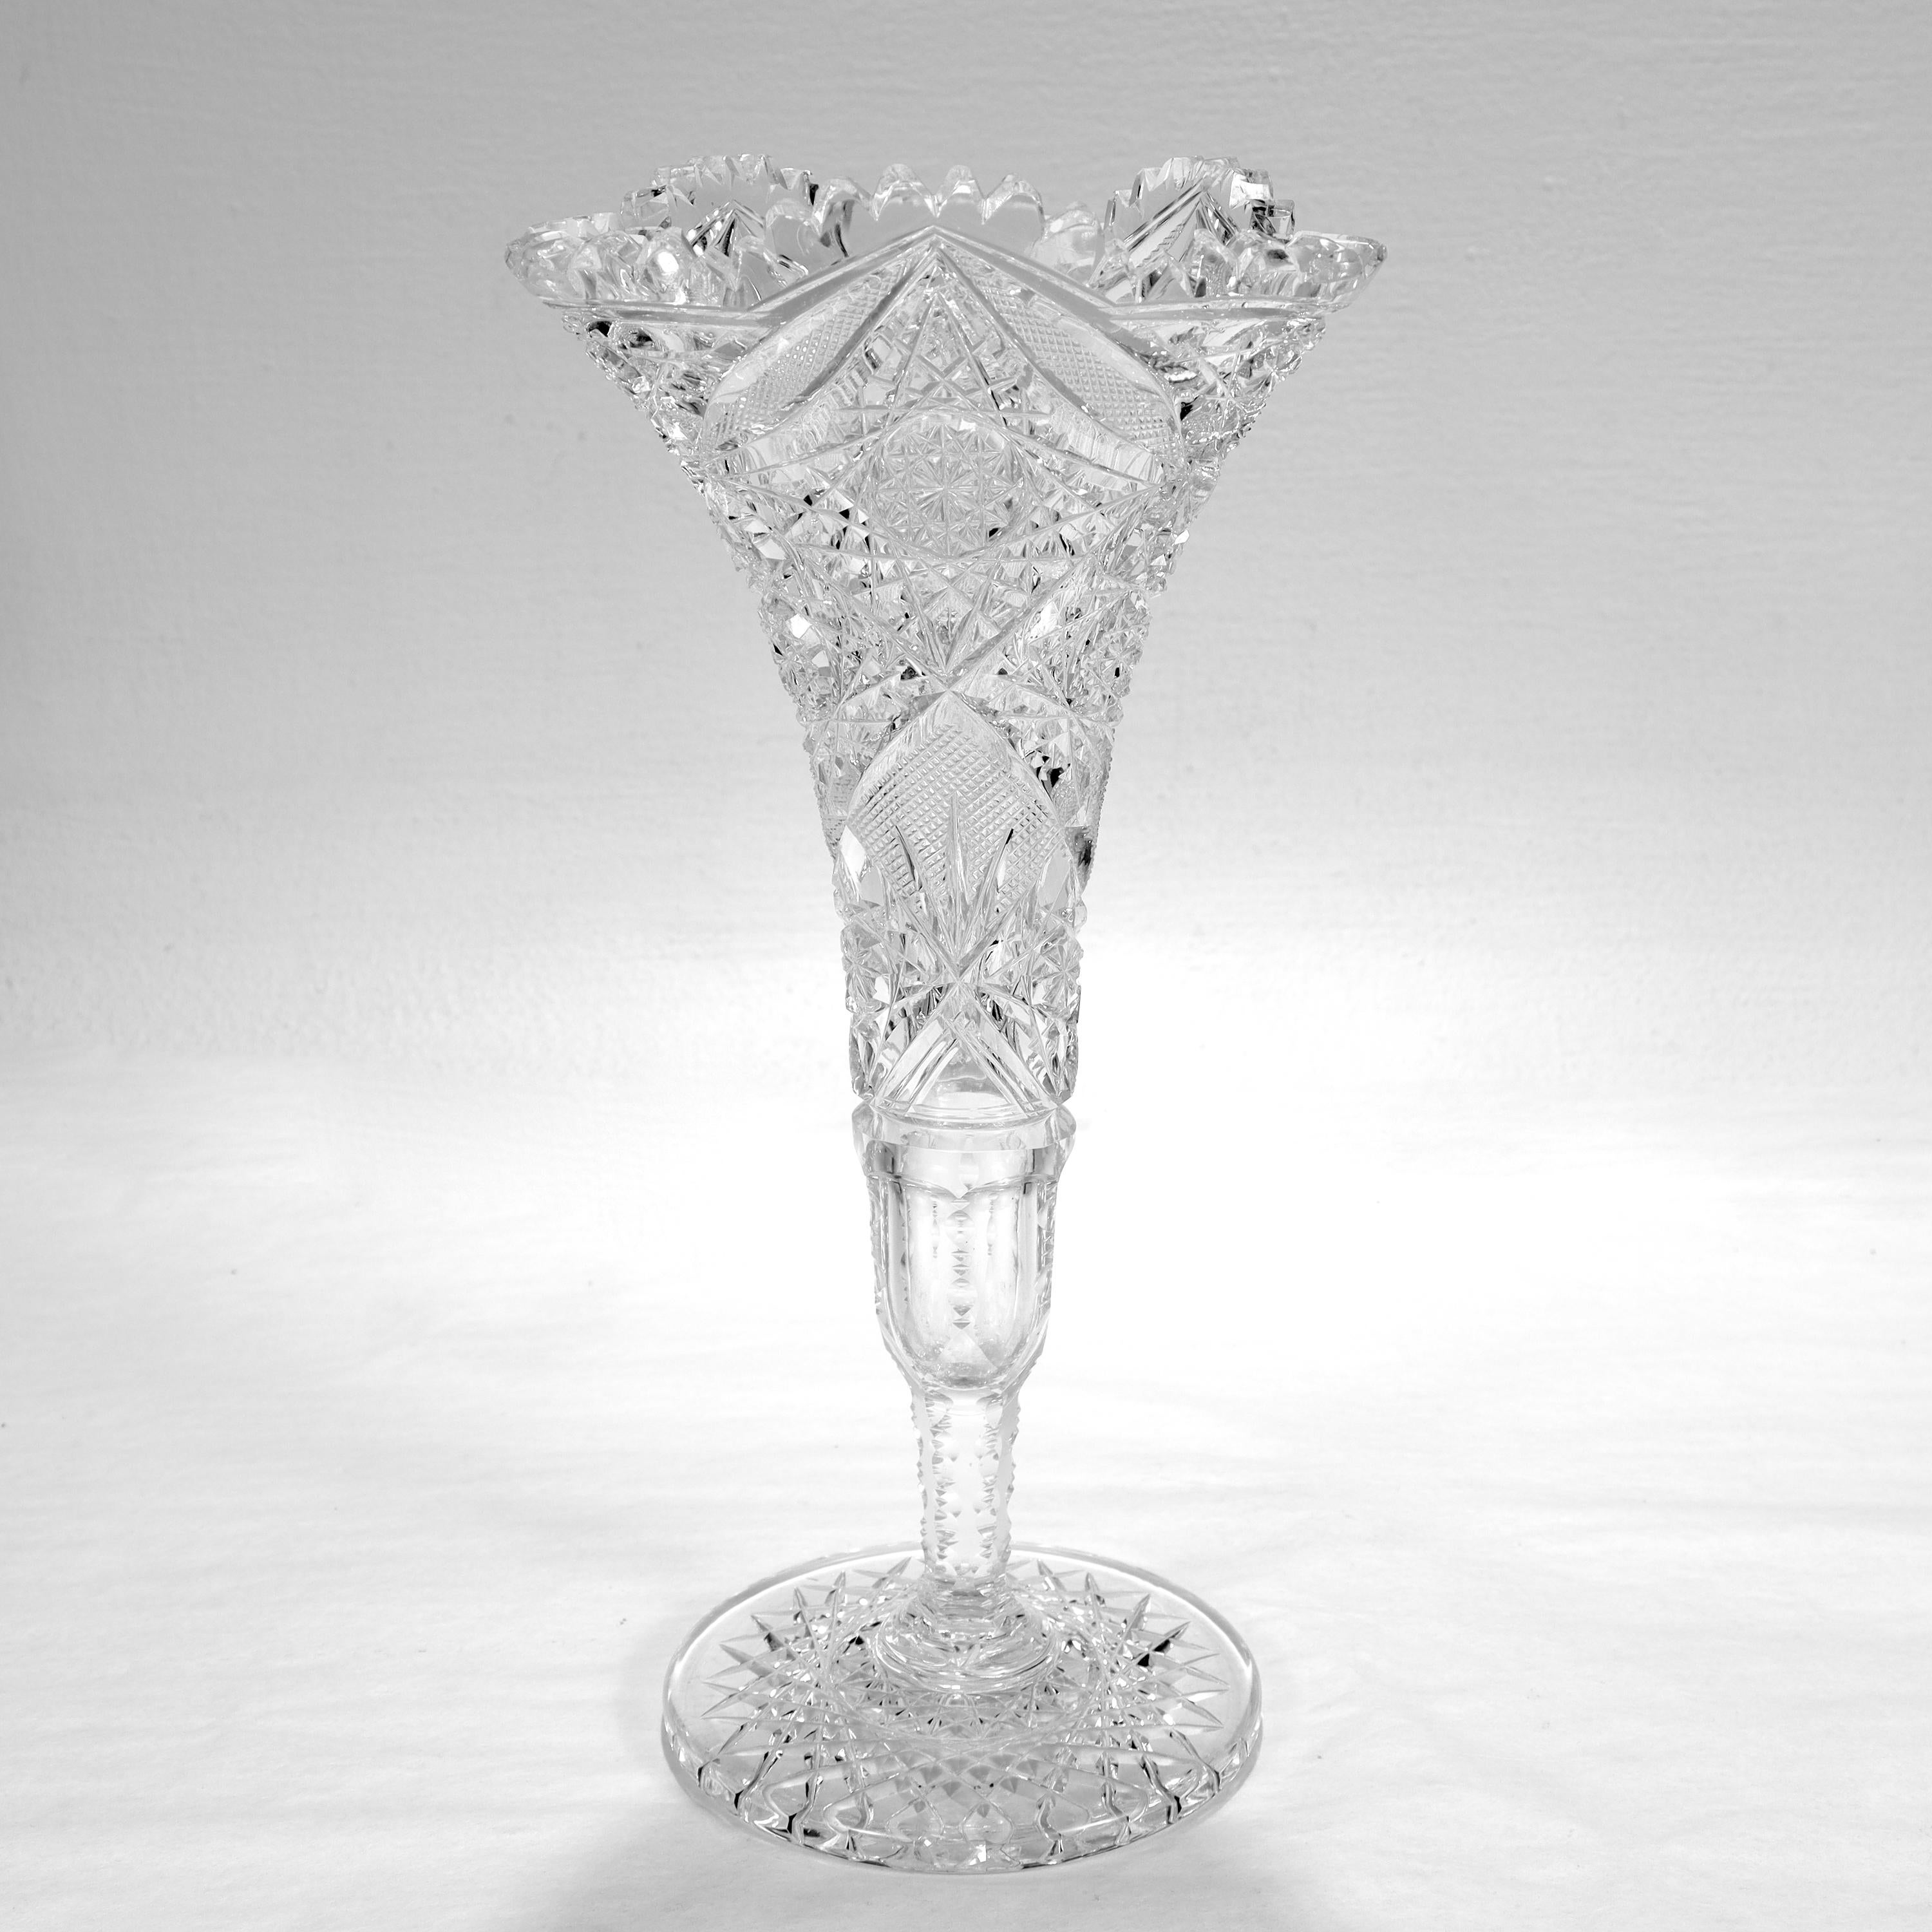 A fine antique American Brilliant Period cut glass vase.

In the form of a pedestal trumpet vase.

With a star pattern to the base, cut decorative patterns throughout, and a scalloped rim.

Simply a lovely American Brilliant Period